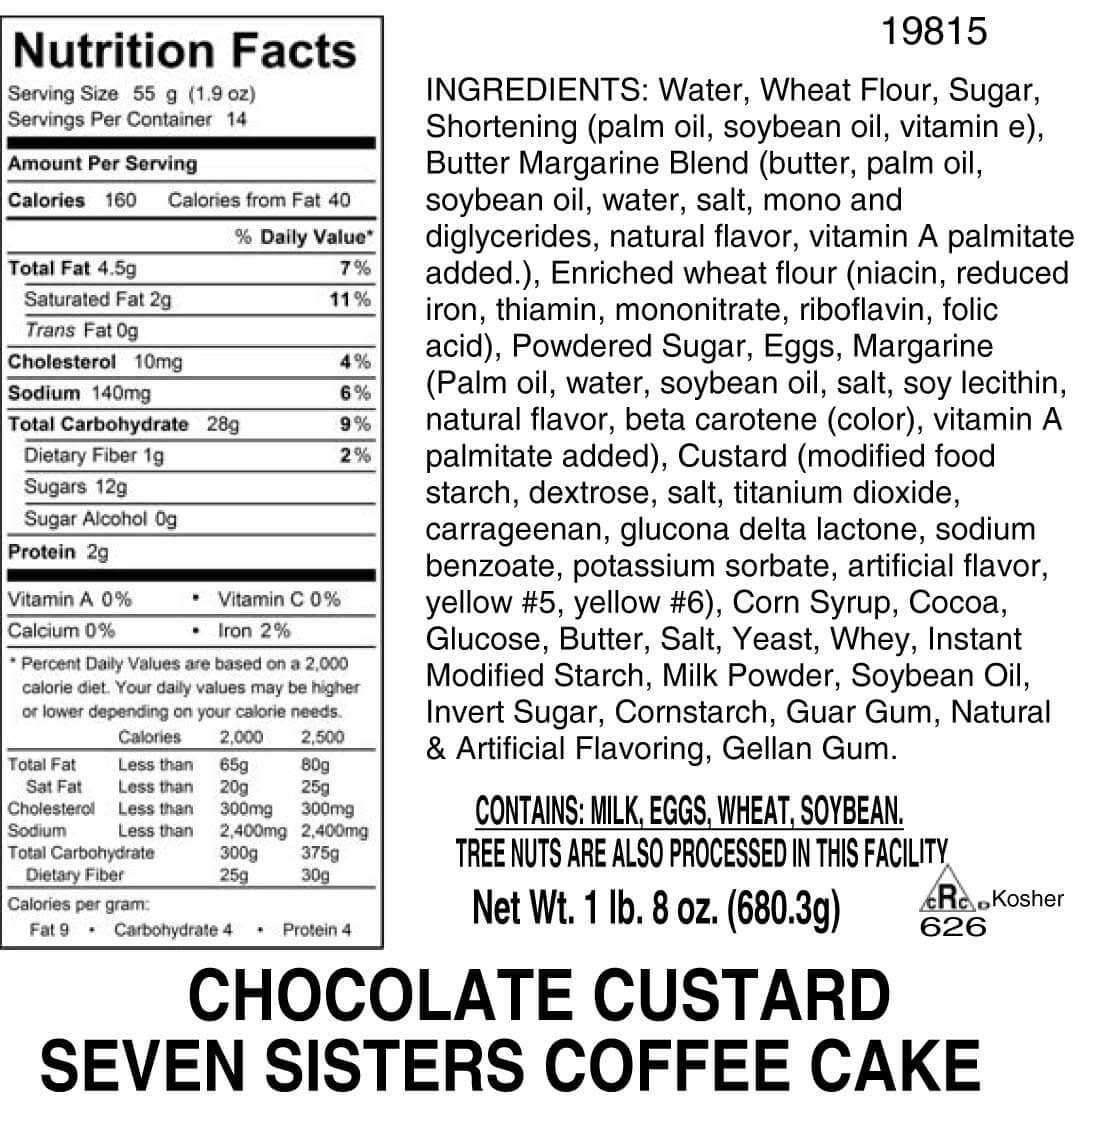 Nutritional Label for Chocolate Custard Seven Sisters Coffee Cake